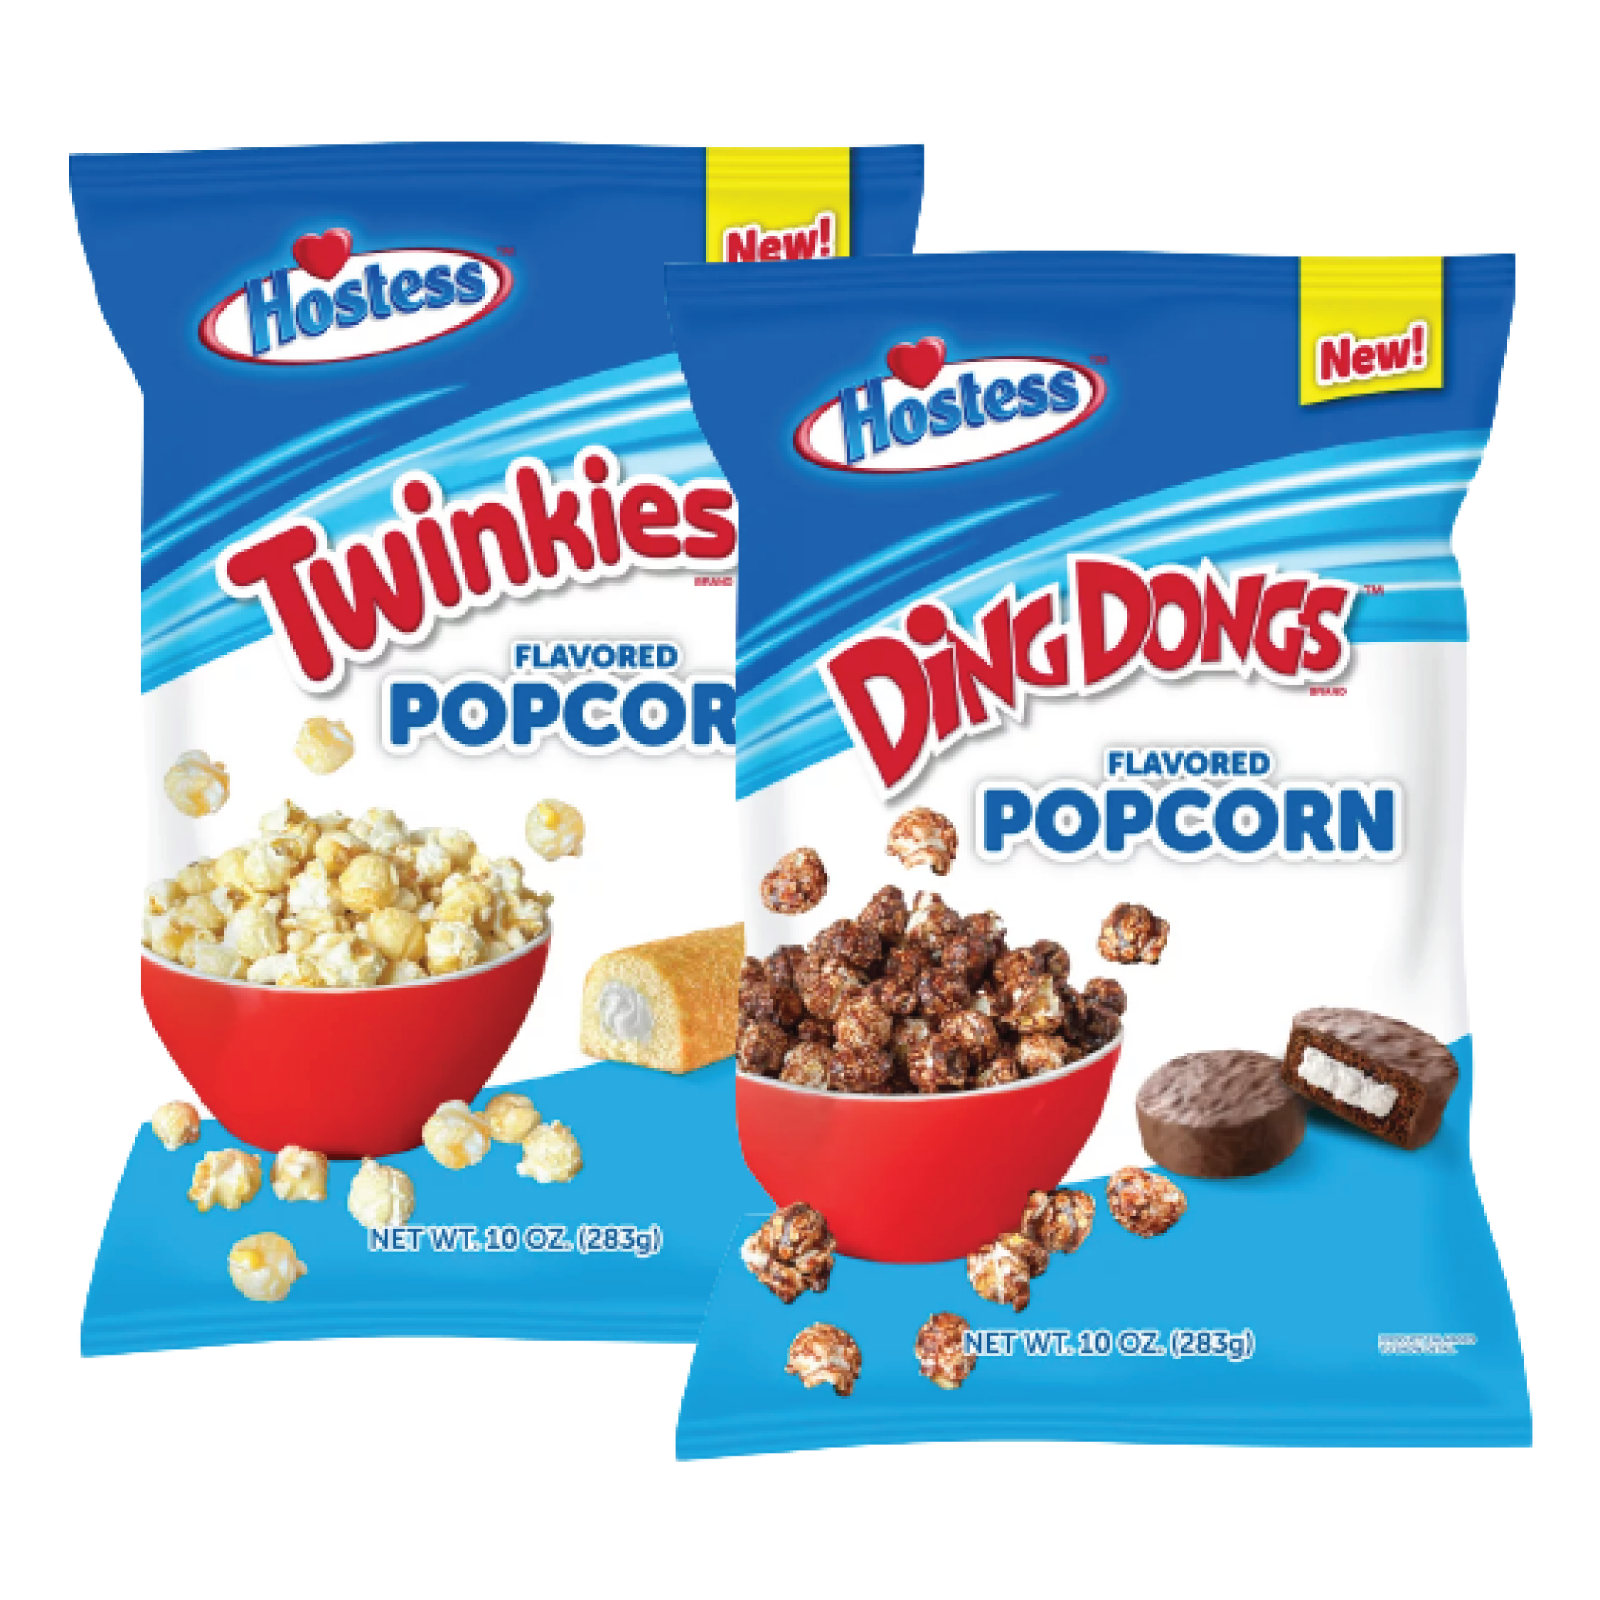 Hostess New Variety Twinkies & Ding Dongs Flavored Popcorn | 10oz | Mix & Match - $12.29 - $66.37